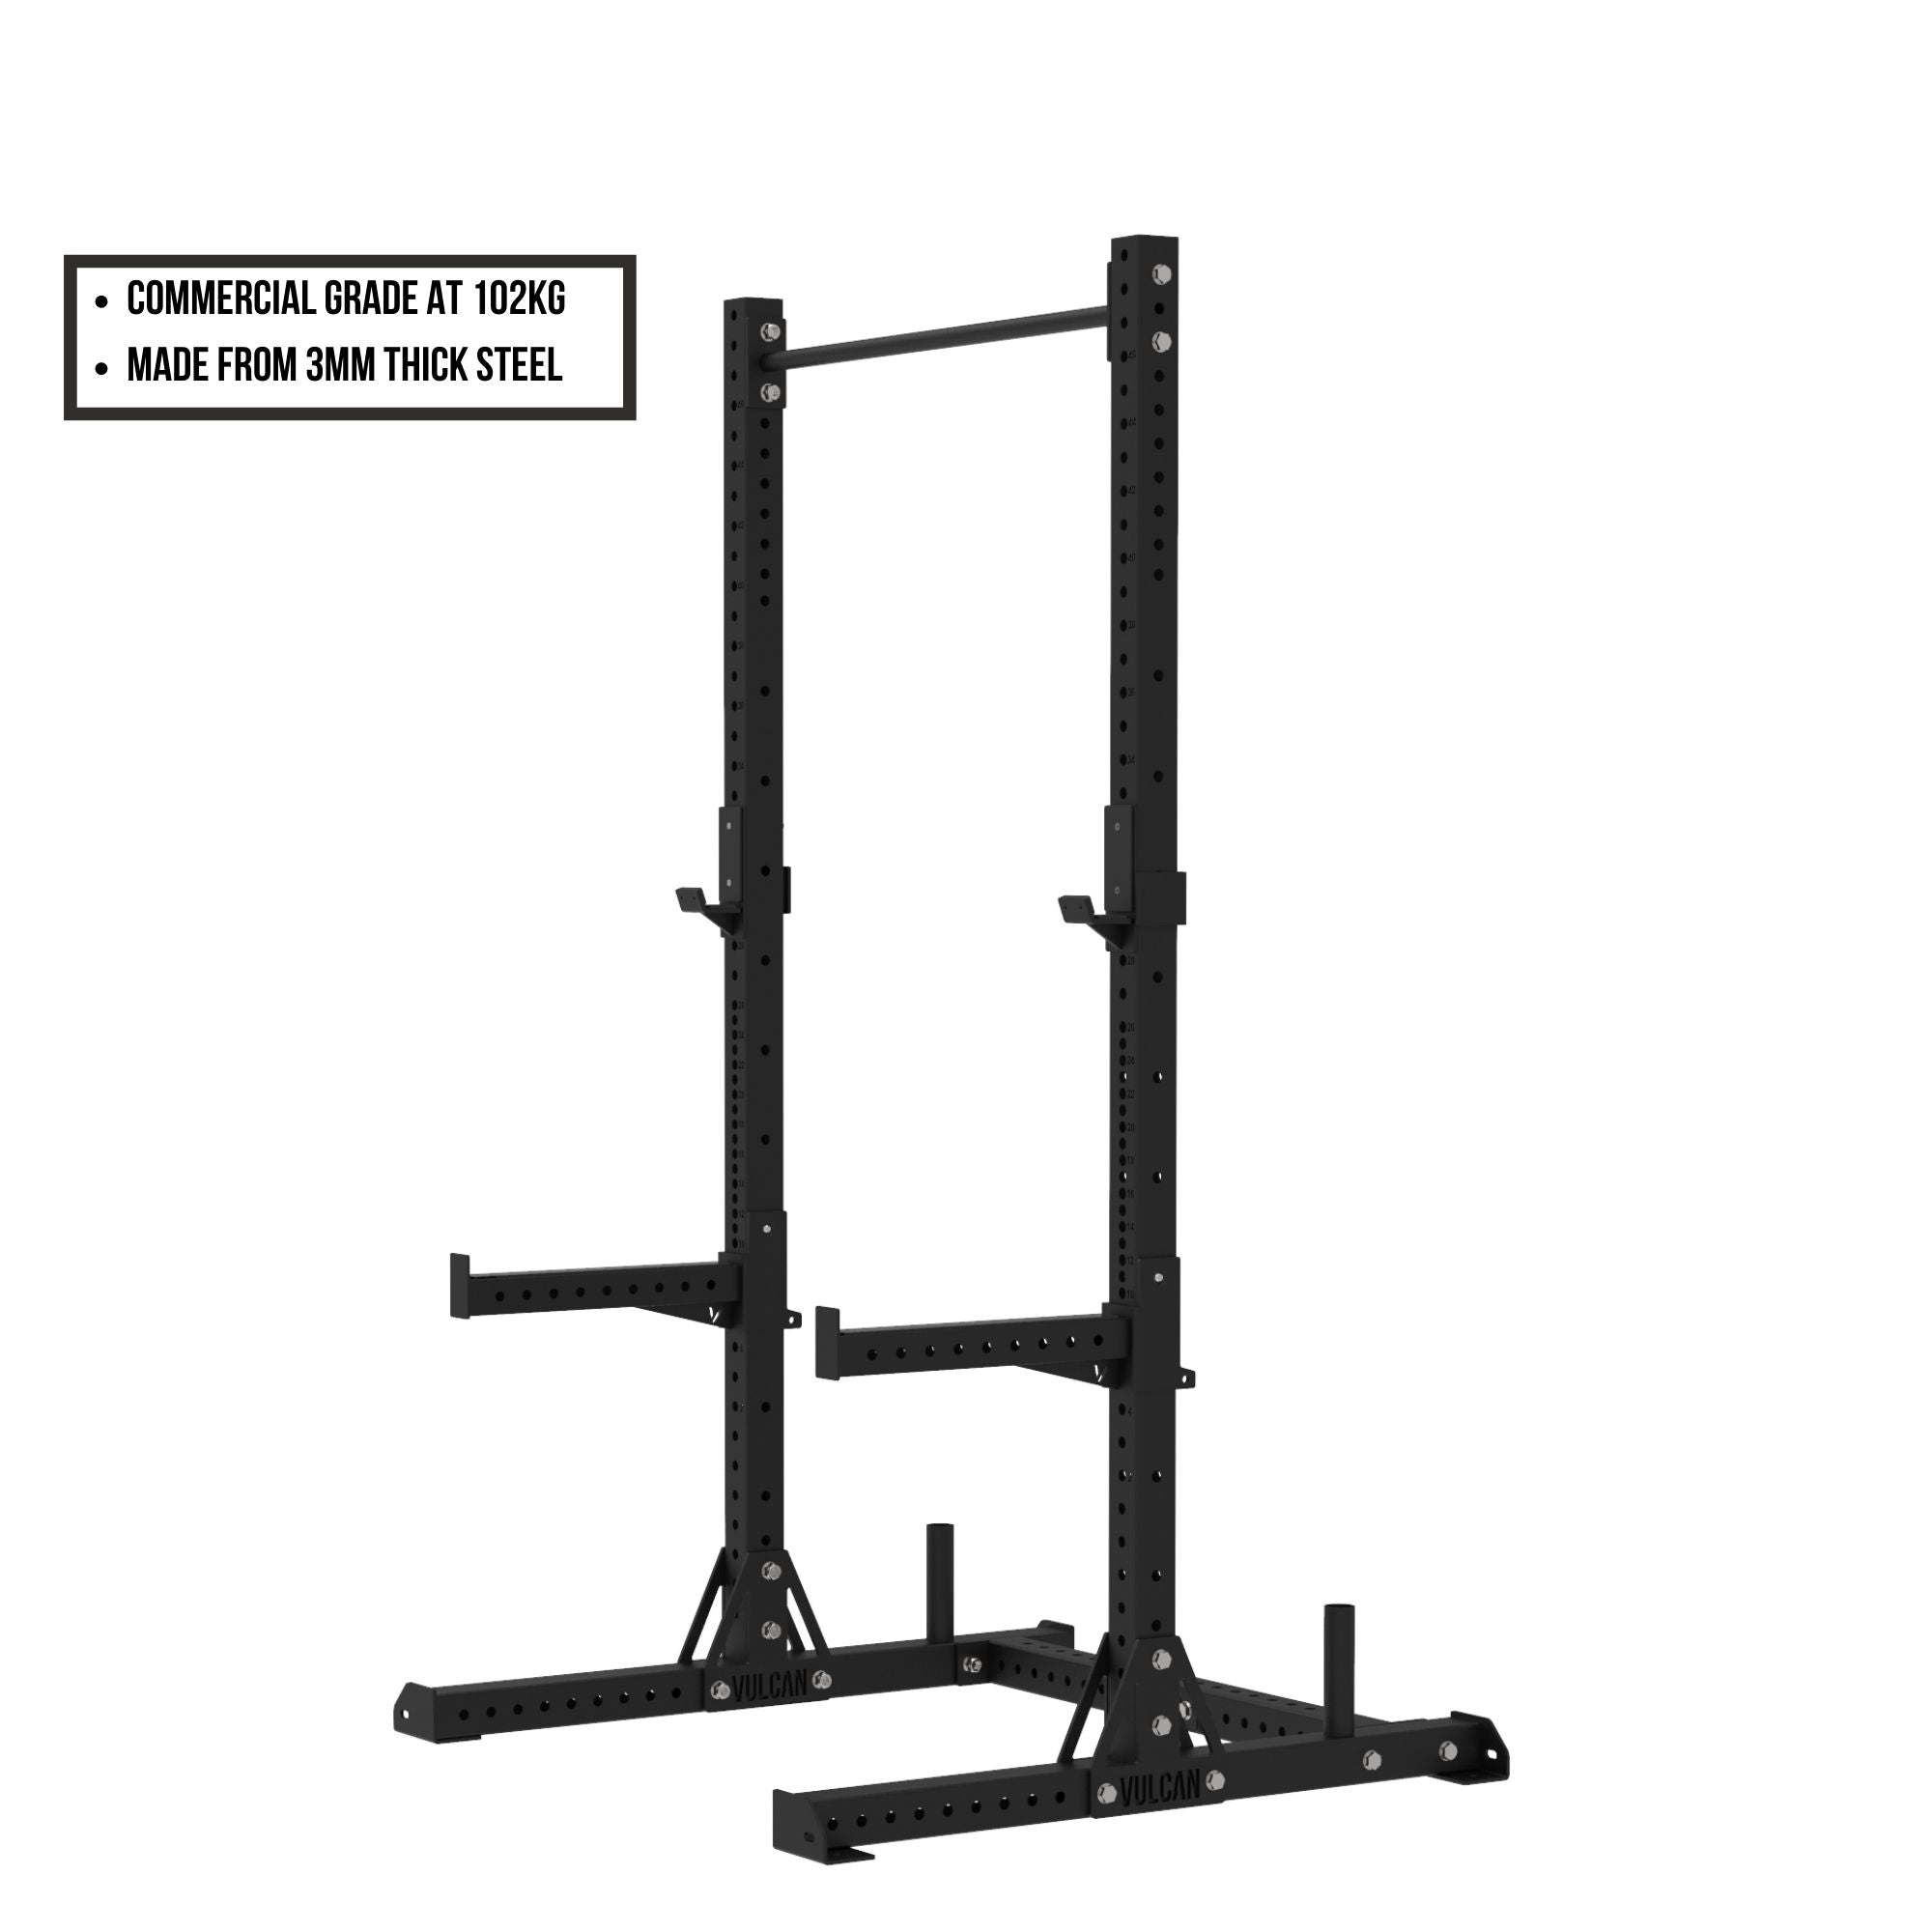 weight of commercial squat rack